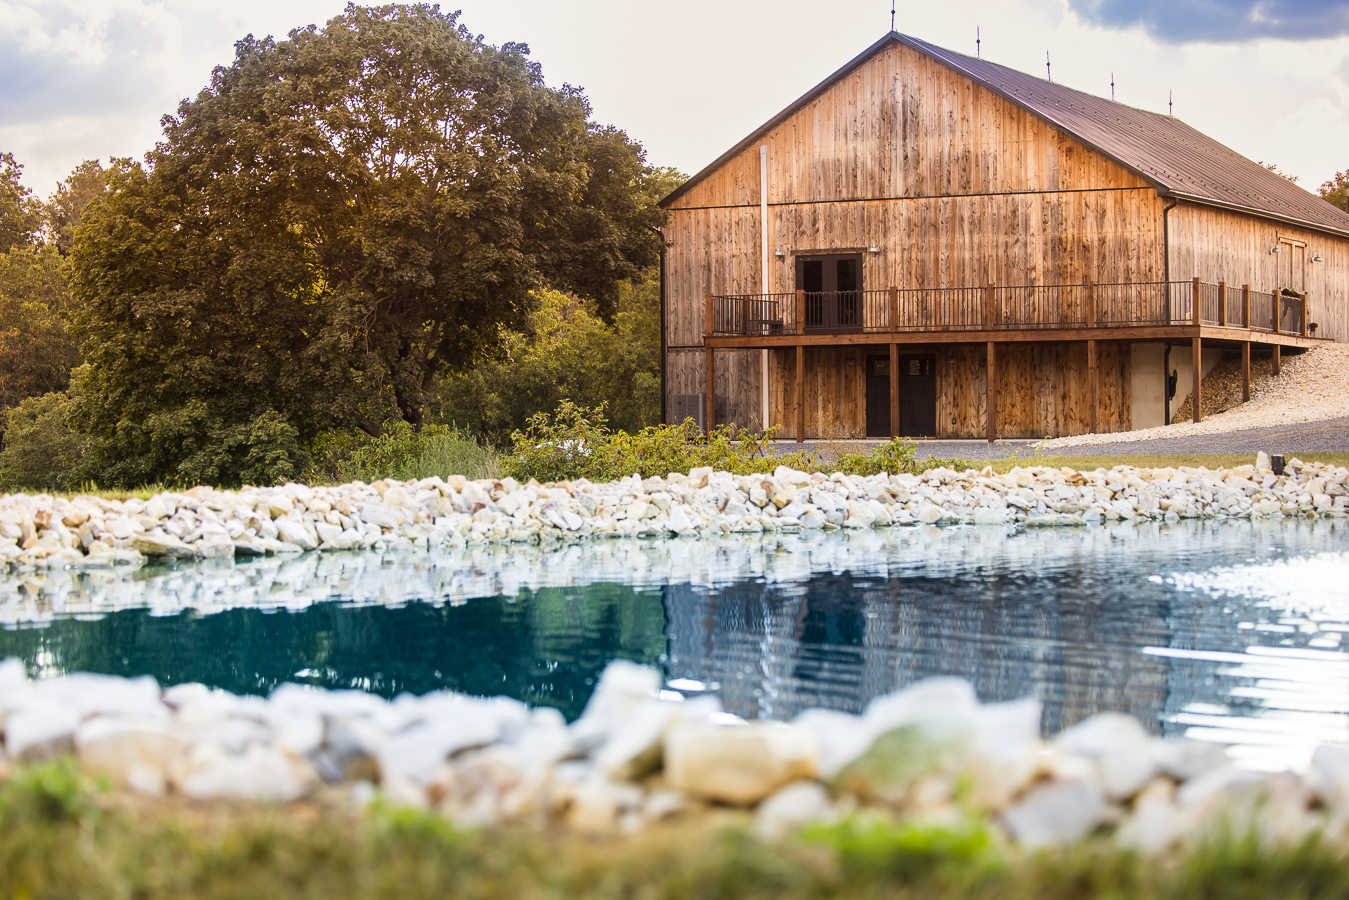 image of the barn and vibrant blue pond located at alpine acres, a new wedding venue in south central pa, that was photographed during this branding photography session 